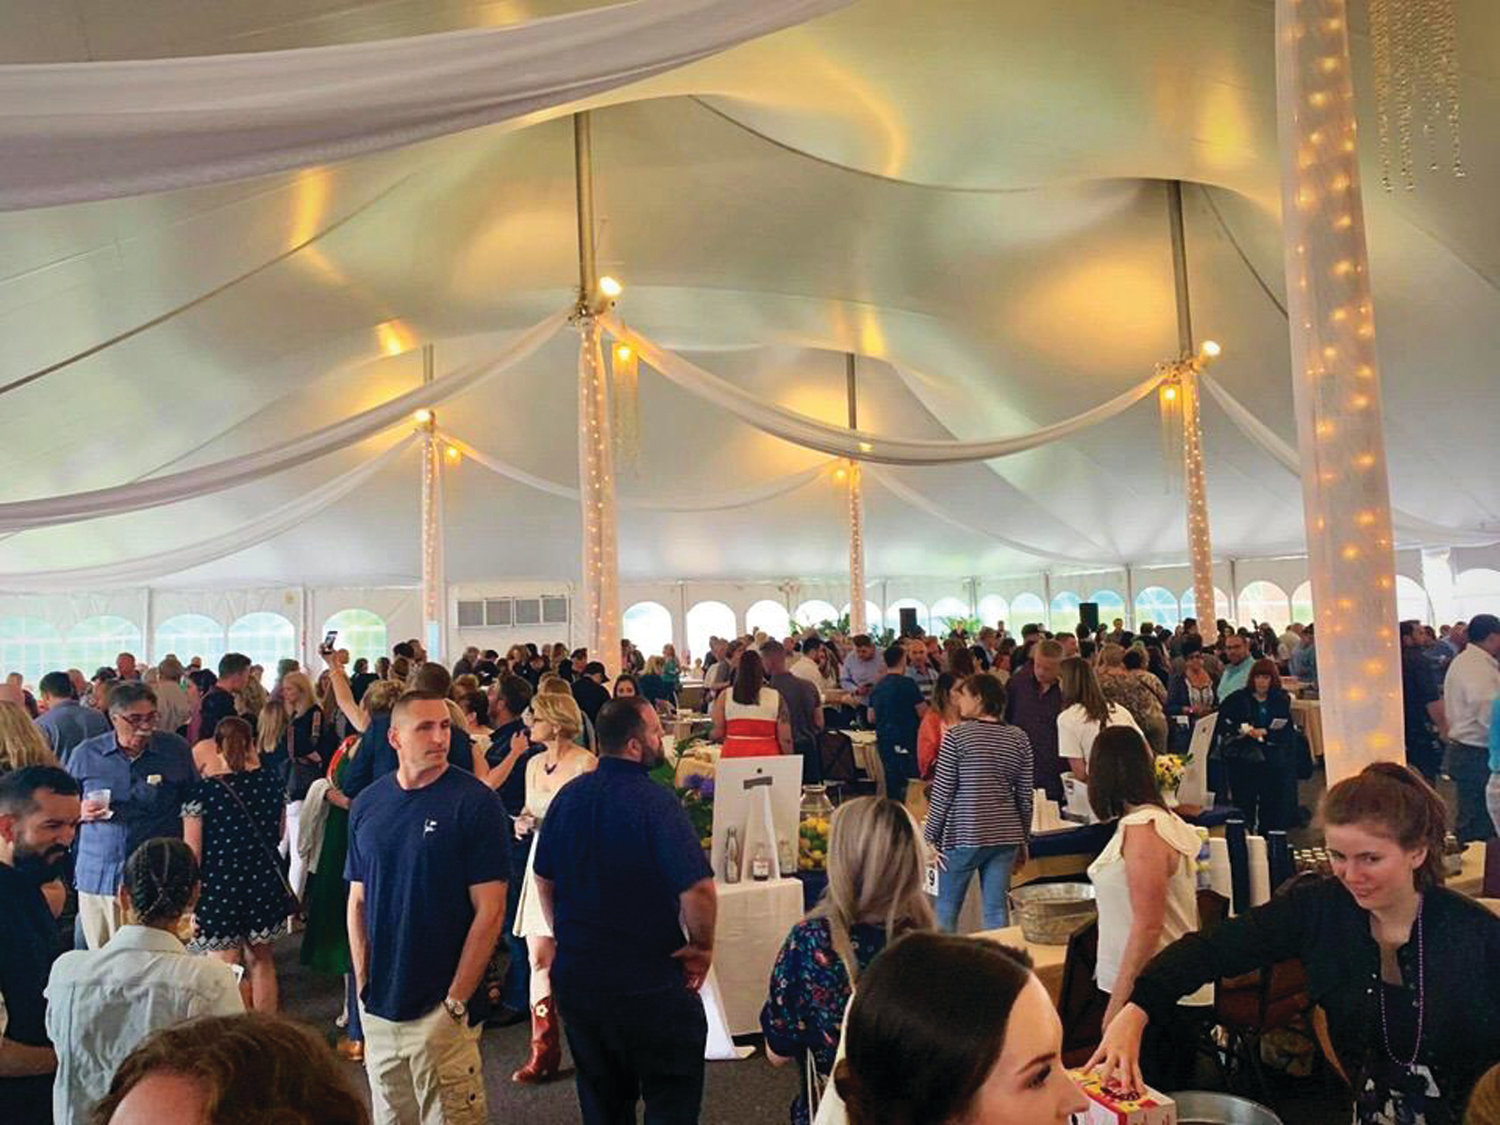 TURNOUT FOR TASTE: A large crowd turned out for the “Taste of Rhode Island” event held June 5 at the Crowne Plaza Hotel’s Garden Pavilion in Warwick.